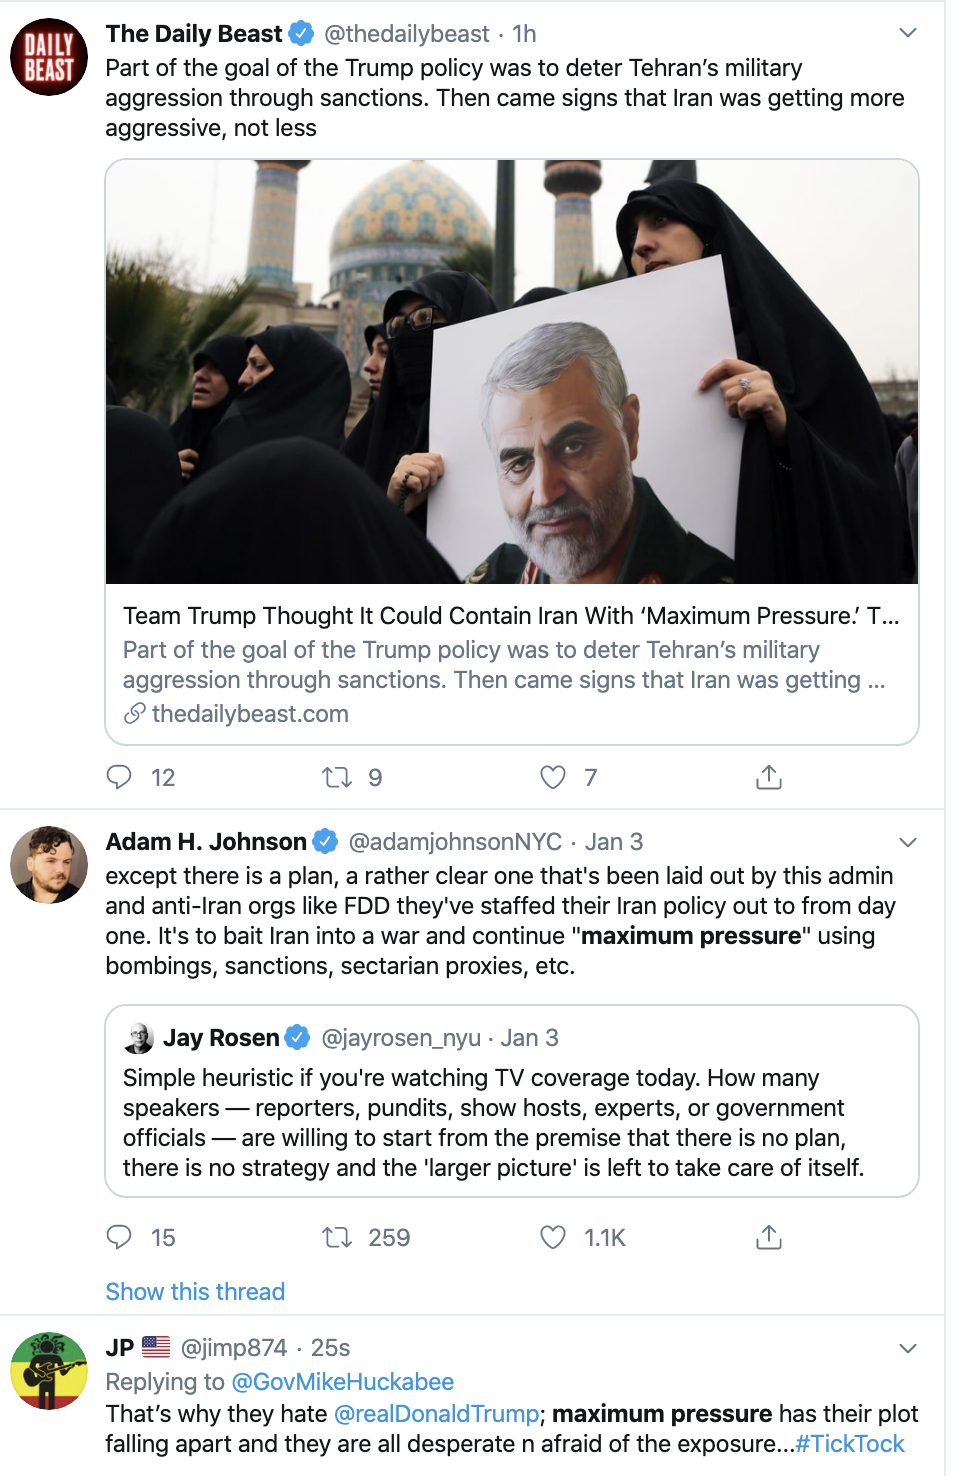 Screen-Shot-2020-01-07-at-10.39.58-AM Trump Only Assassinated Soleimani Because Other Plans Fell Through: report Featured Foreign Policy Military Politics Top Stories 